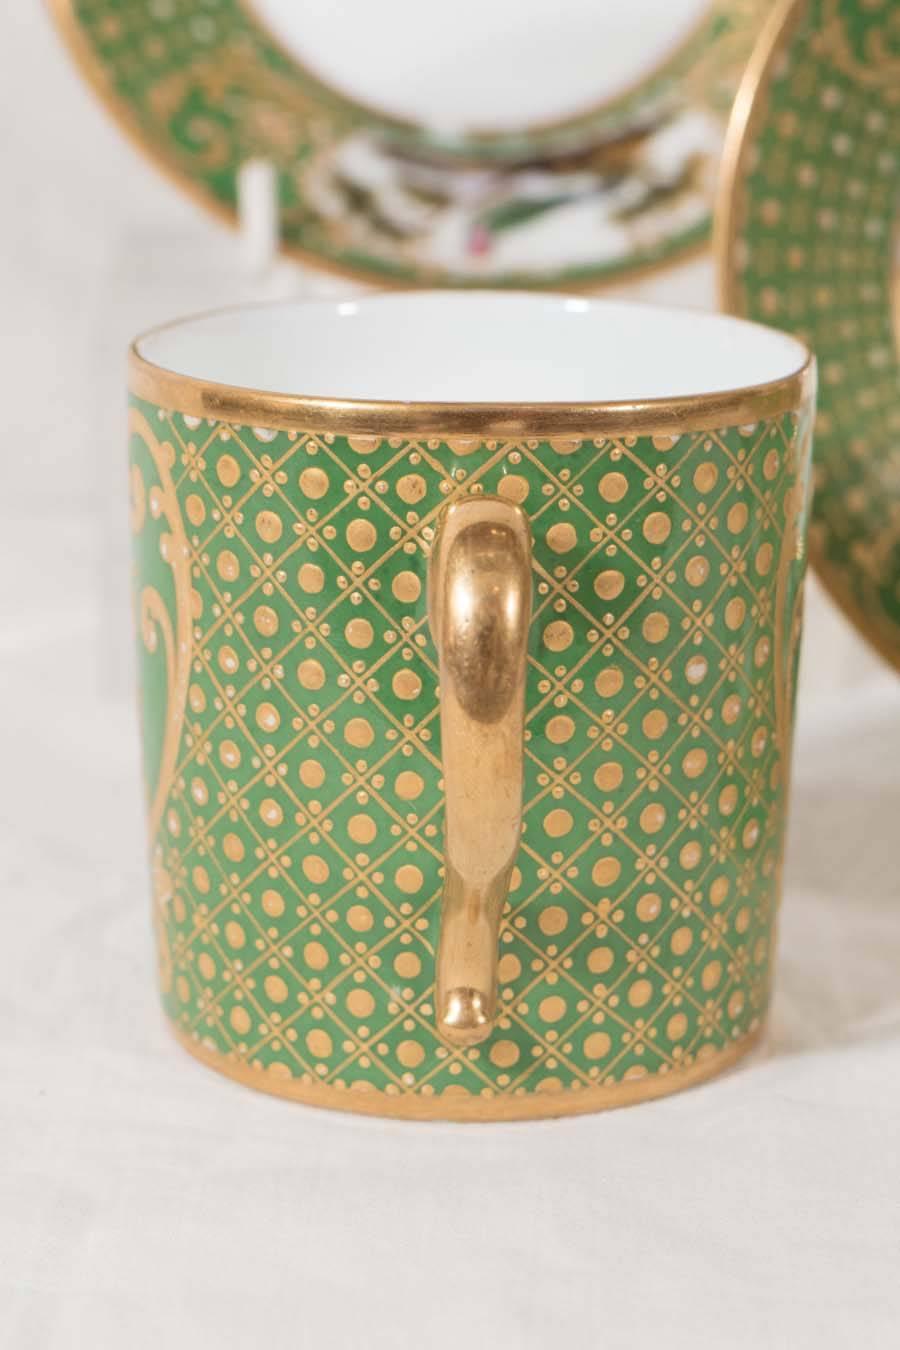 Four Paris Porcelain Coffee Cans with Hand-Painted Birds on a French Green Groun 2